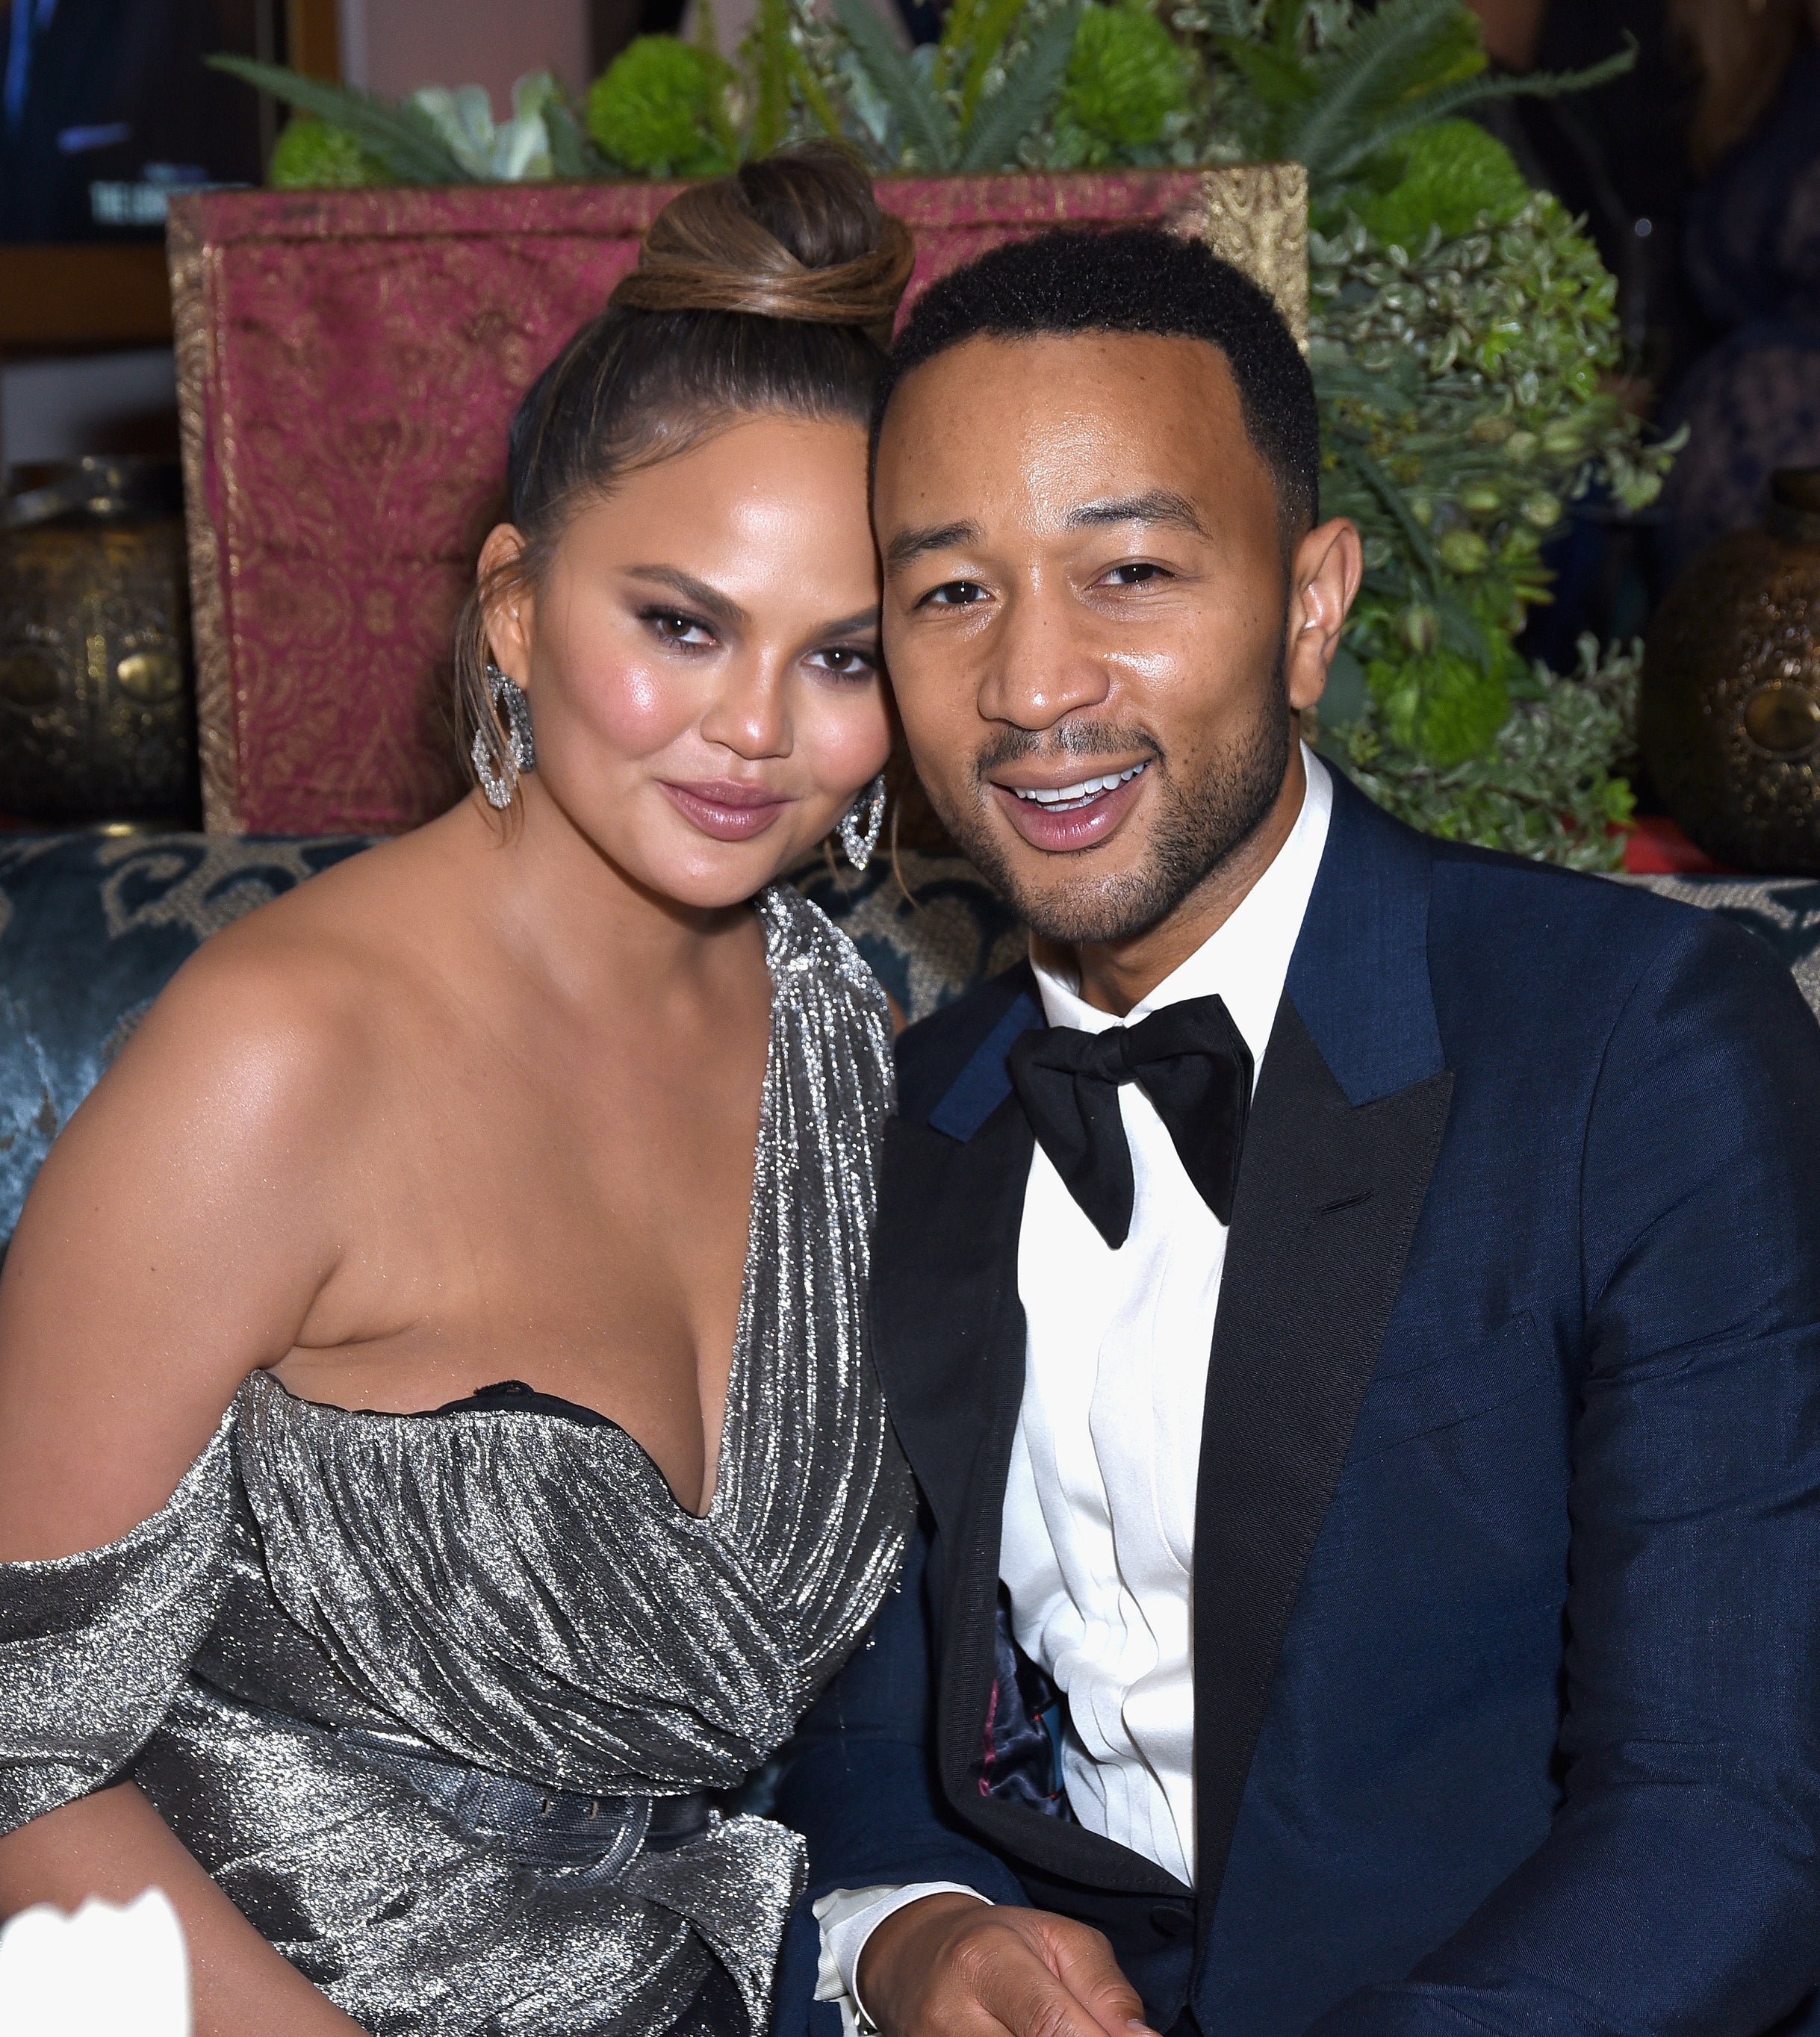 Closeup of Chrissy Teigen and John Legend leaning into each other for a photo